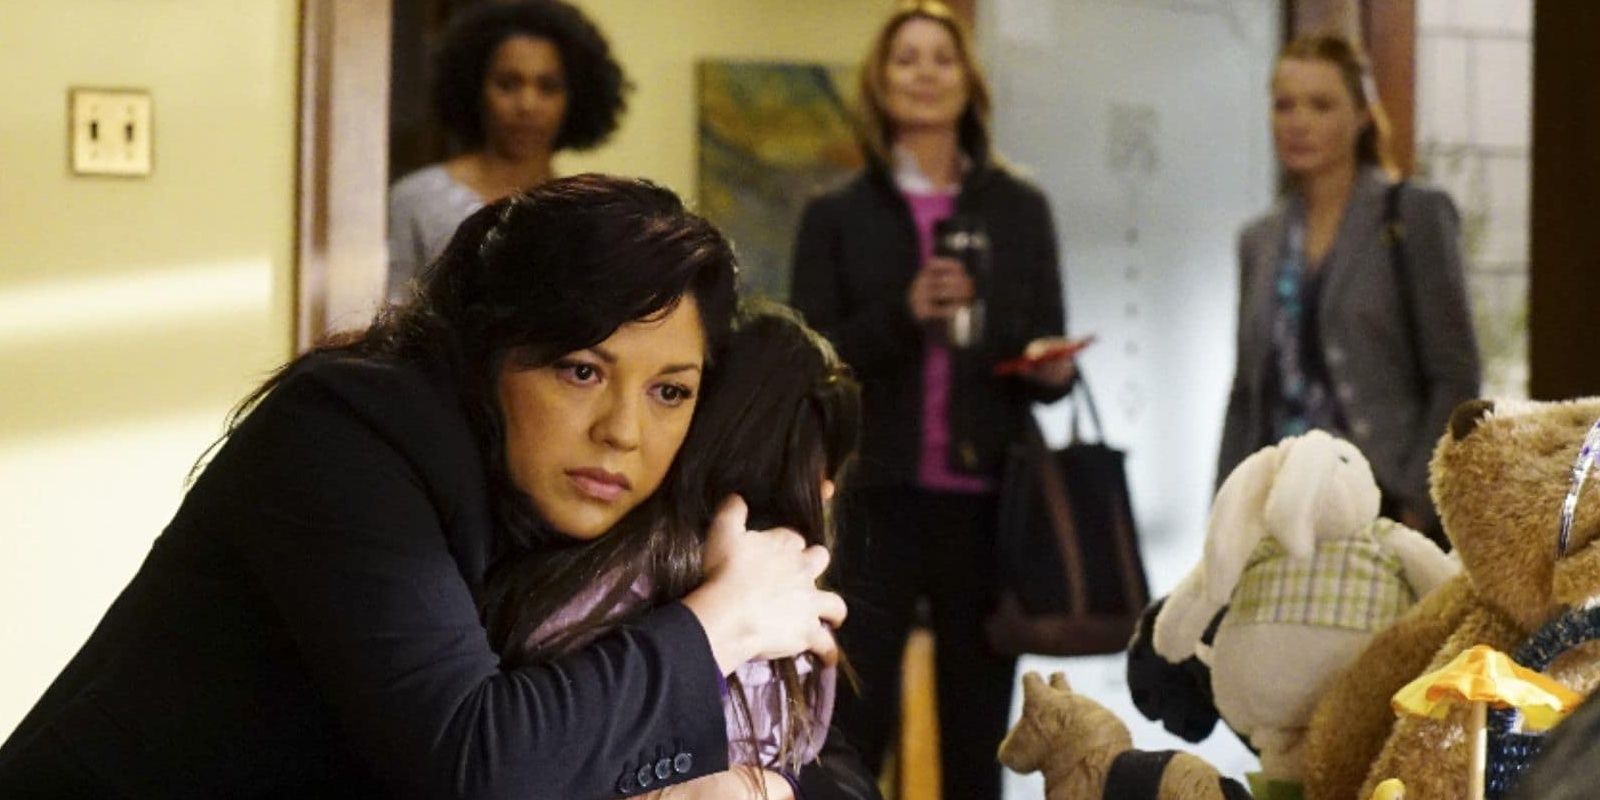 Greys Anatomy 5 Times Callie Torres Was An Overrated Character (& 5 She Was Underrated)